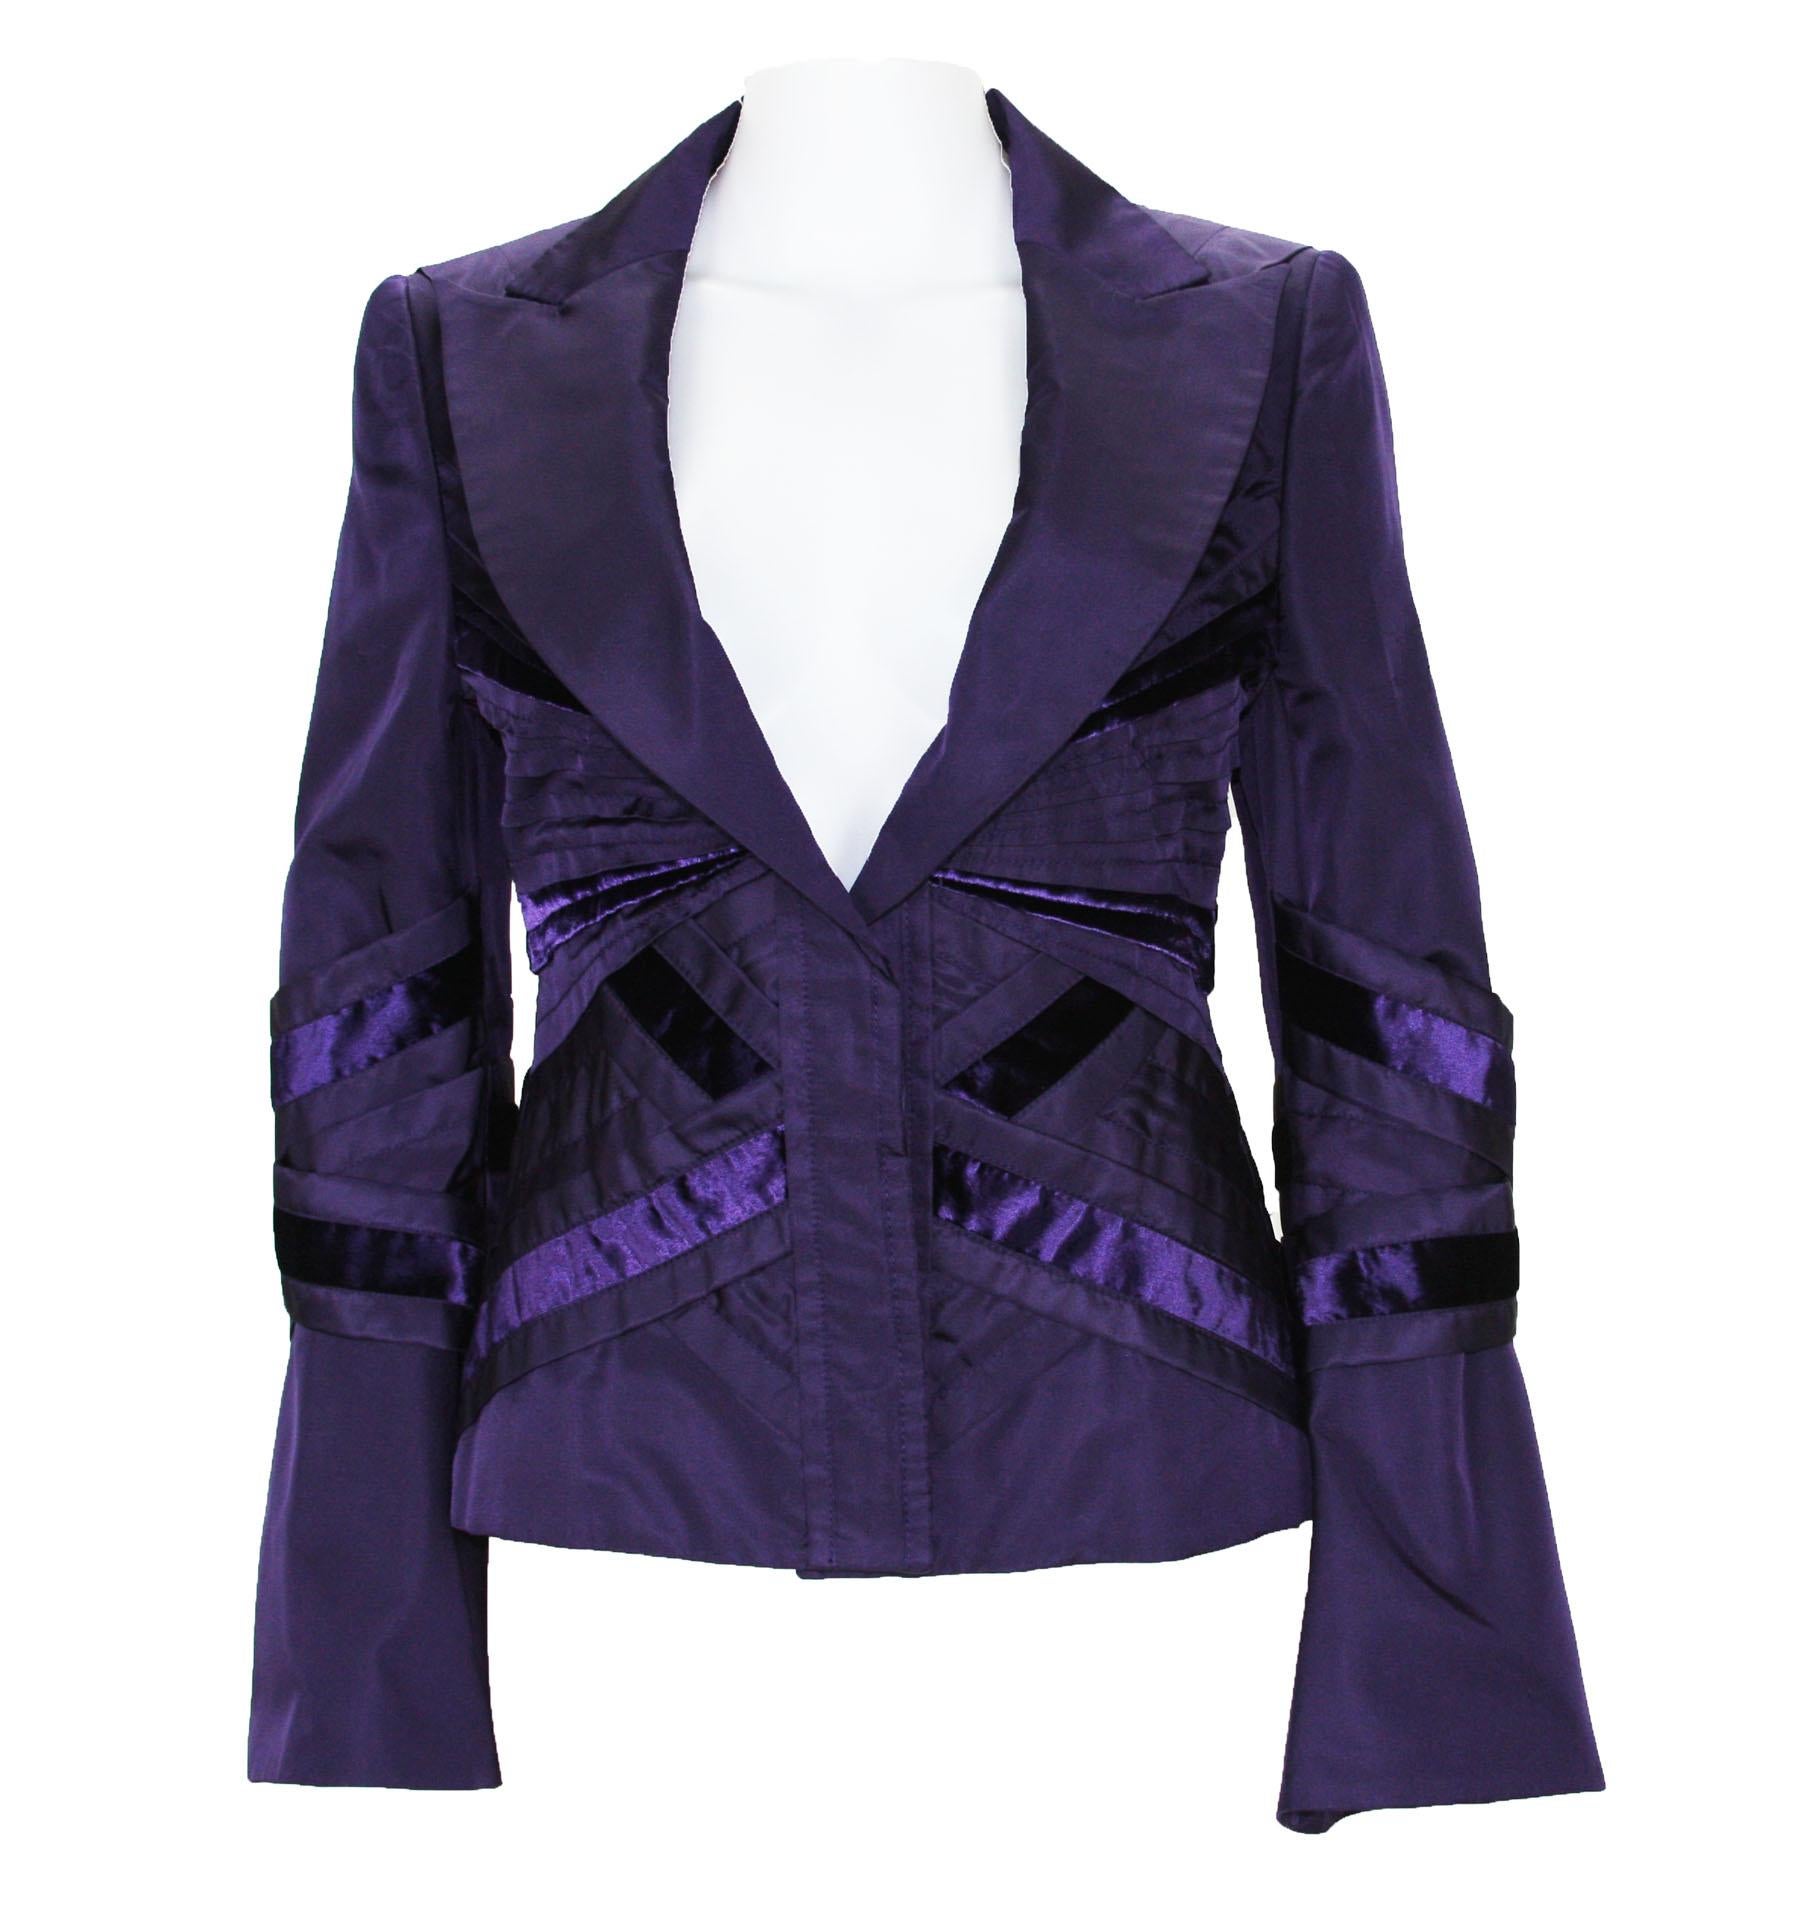 Tom Ford for Gucci F/W 2004 Runway Collection Purple Silk Taffeta Jacket 42 - 6 In Excellent Condition For Sale In Montgomery, TX